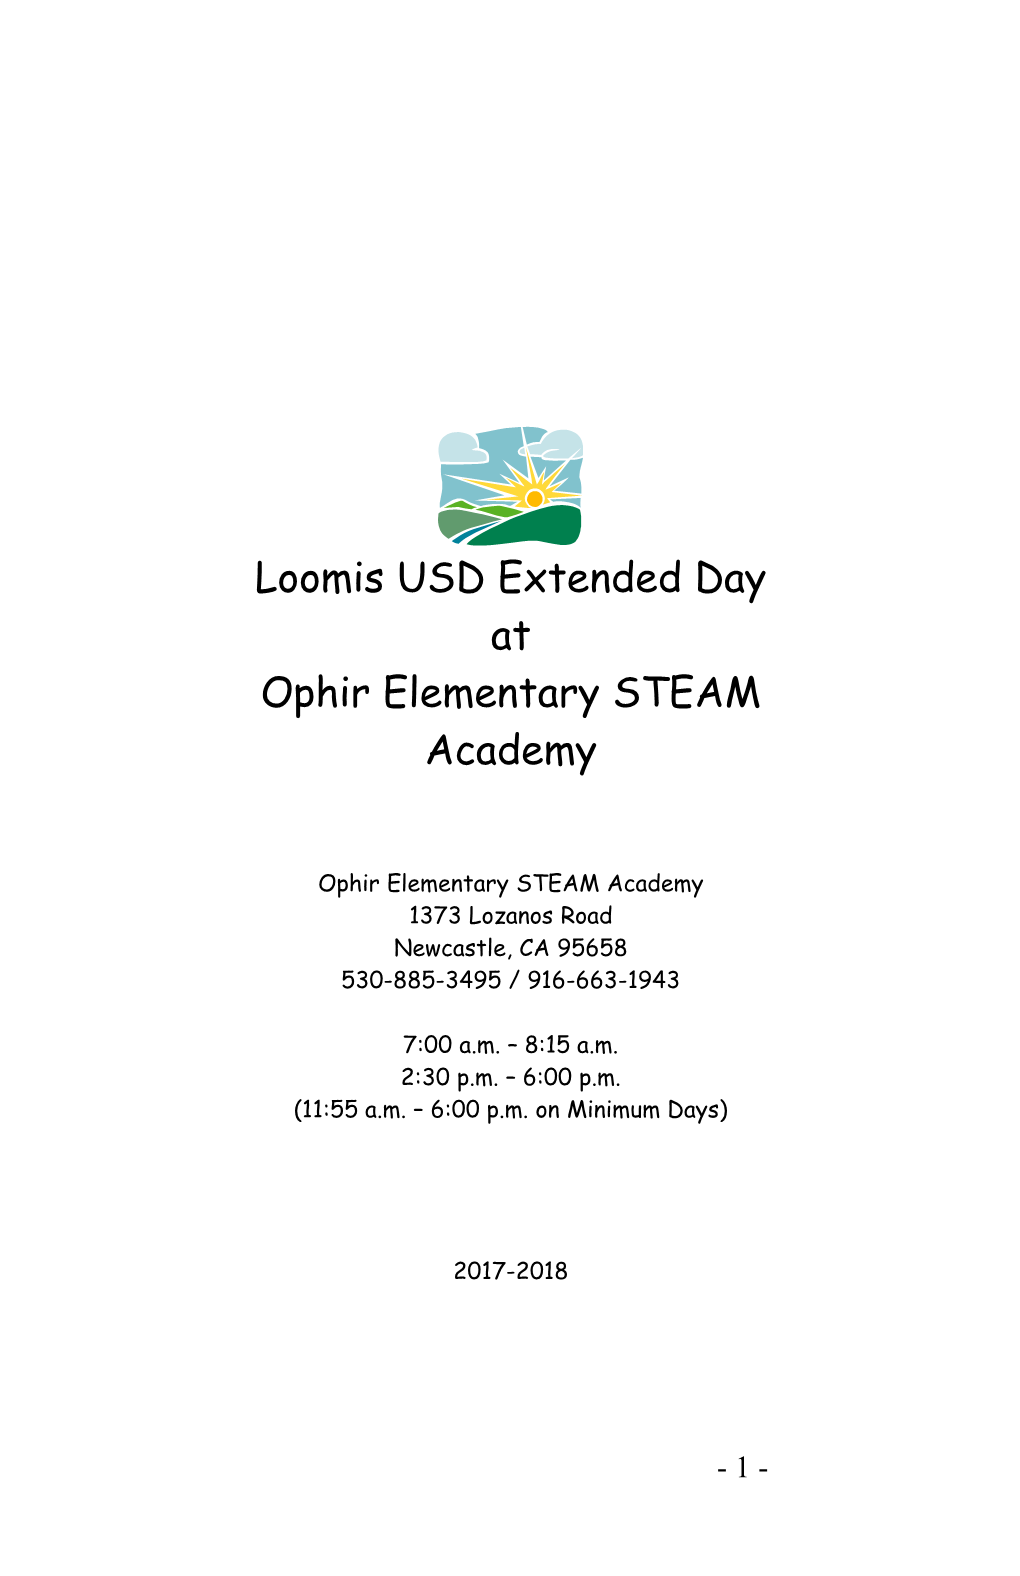 Loomis USD Extended Day